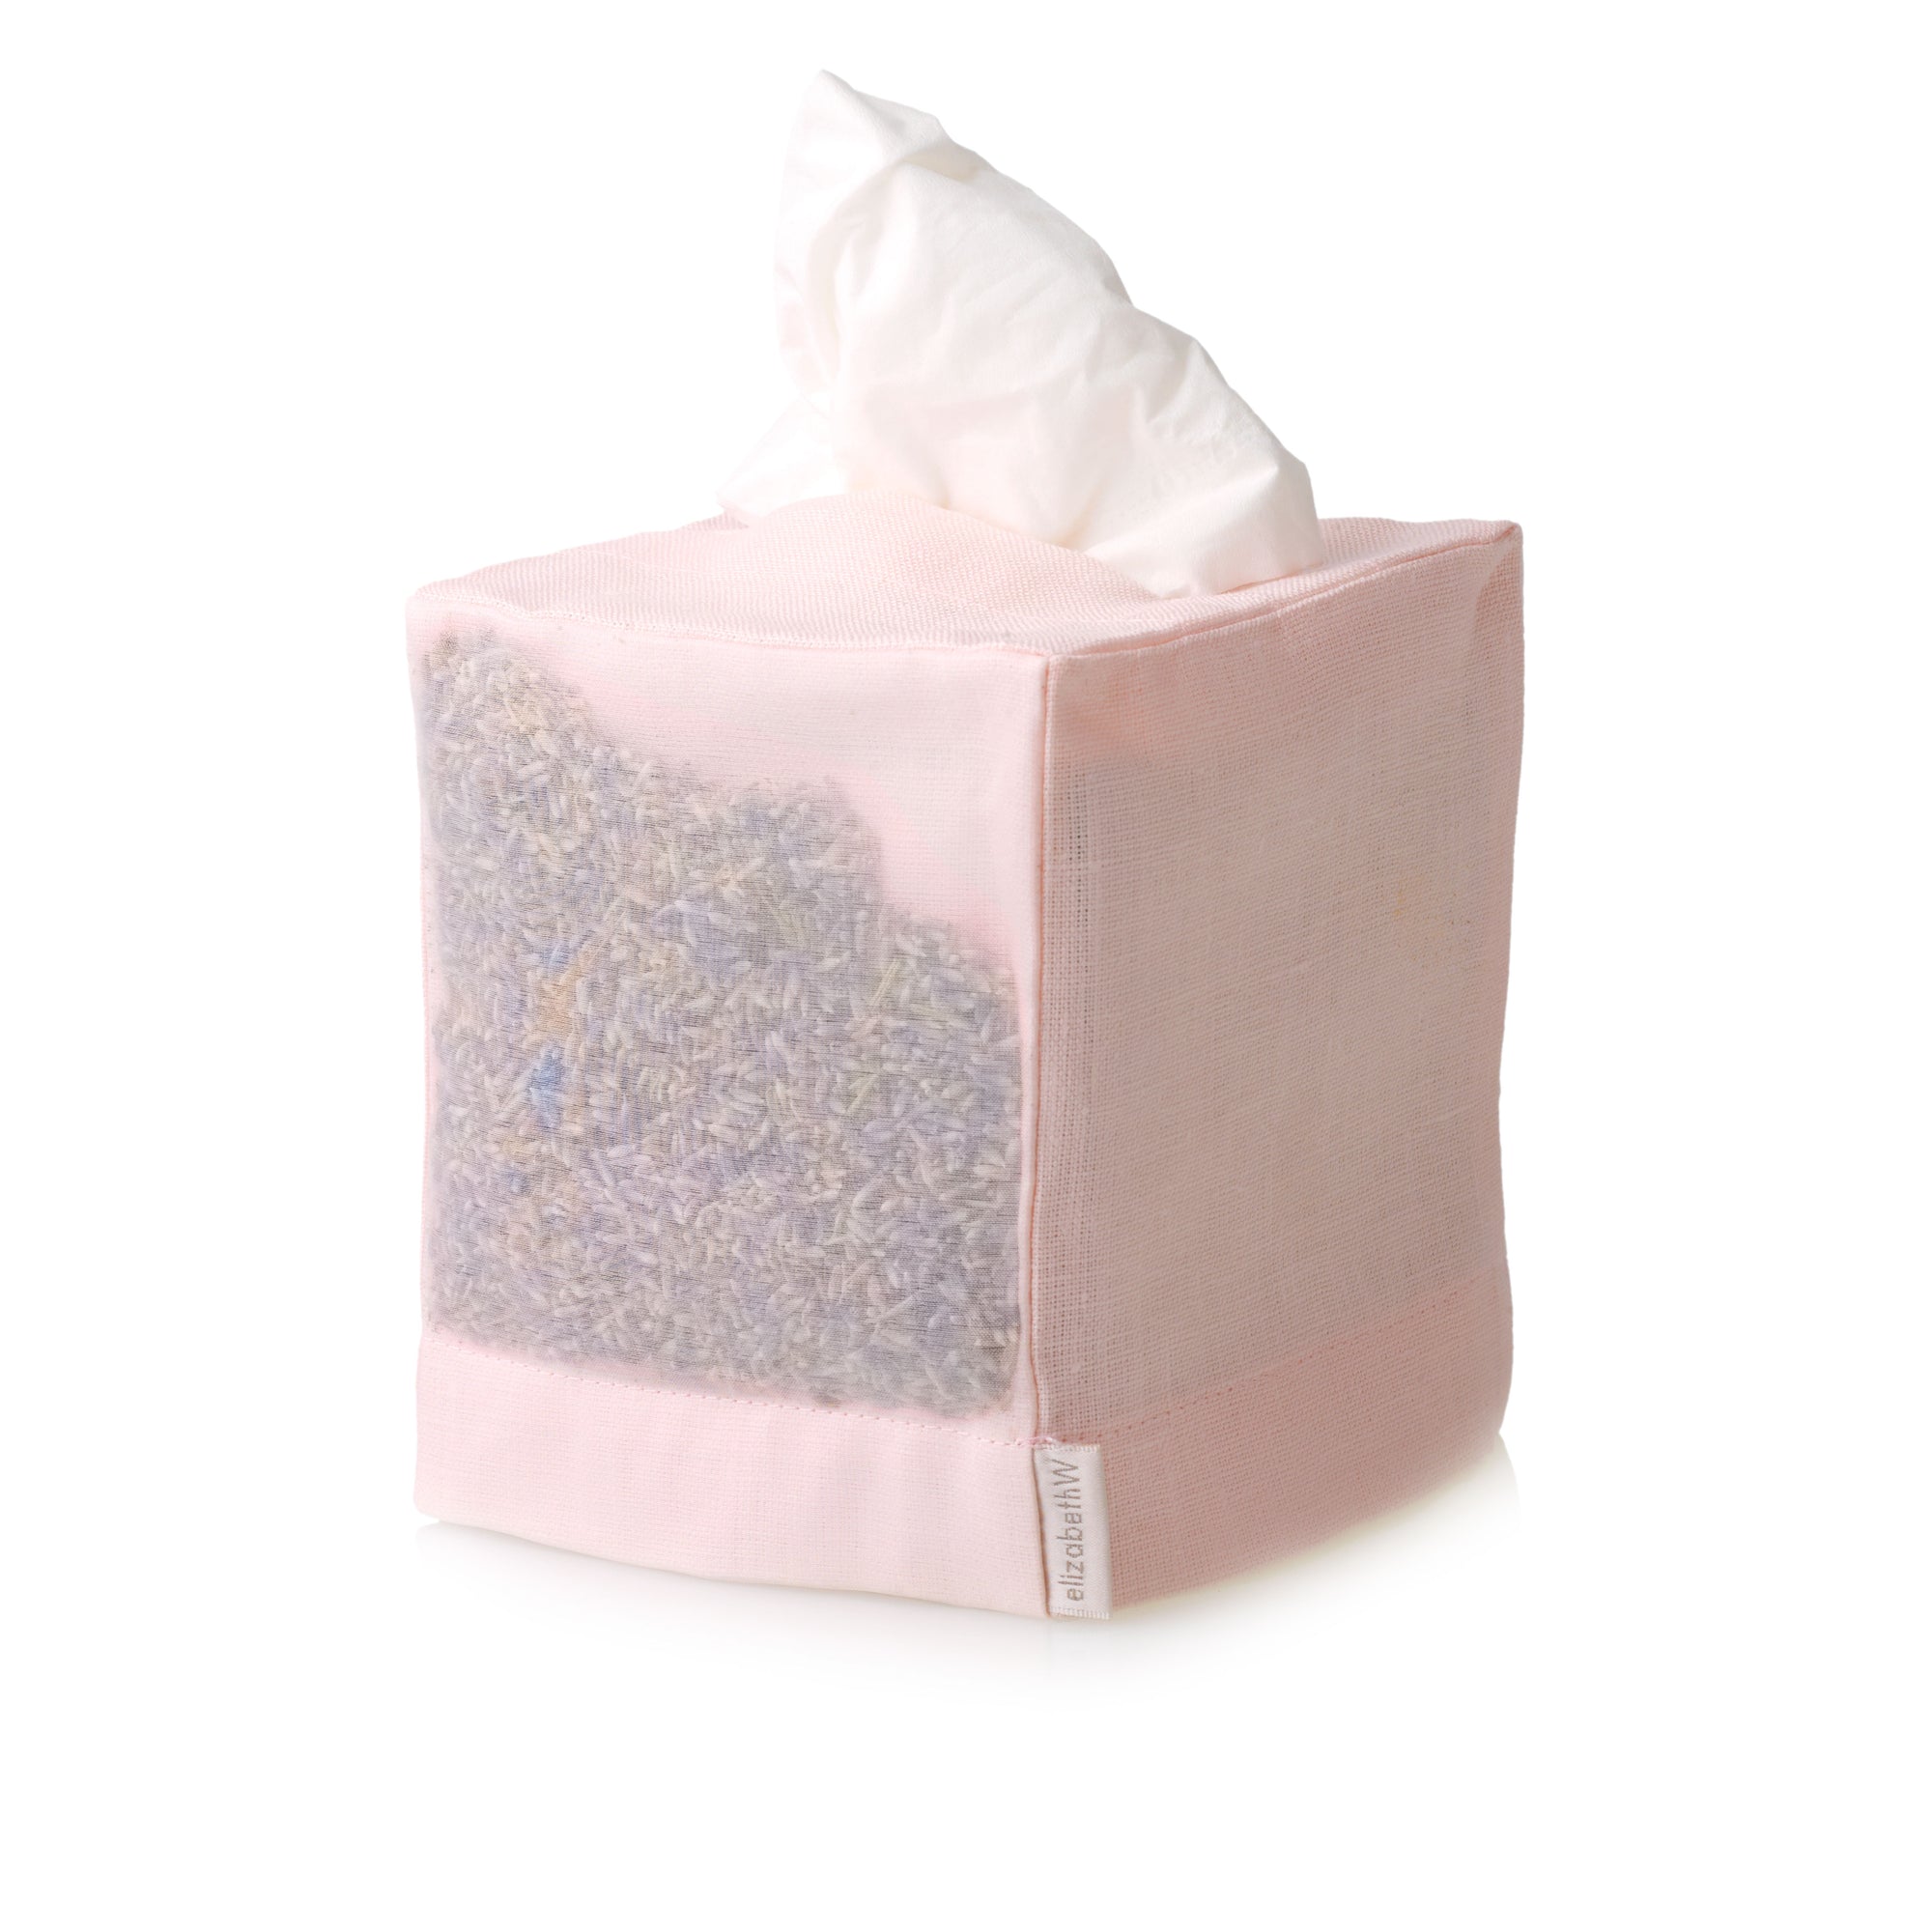 Square tissue cover in pink linen with lavender.